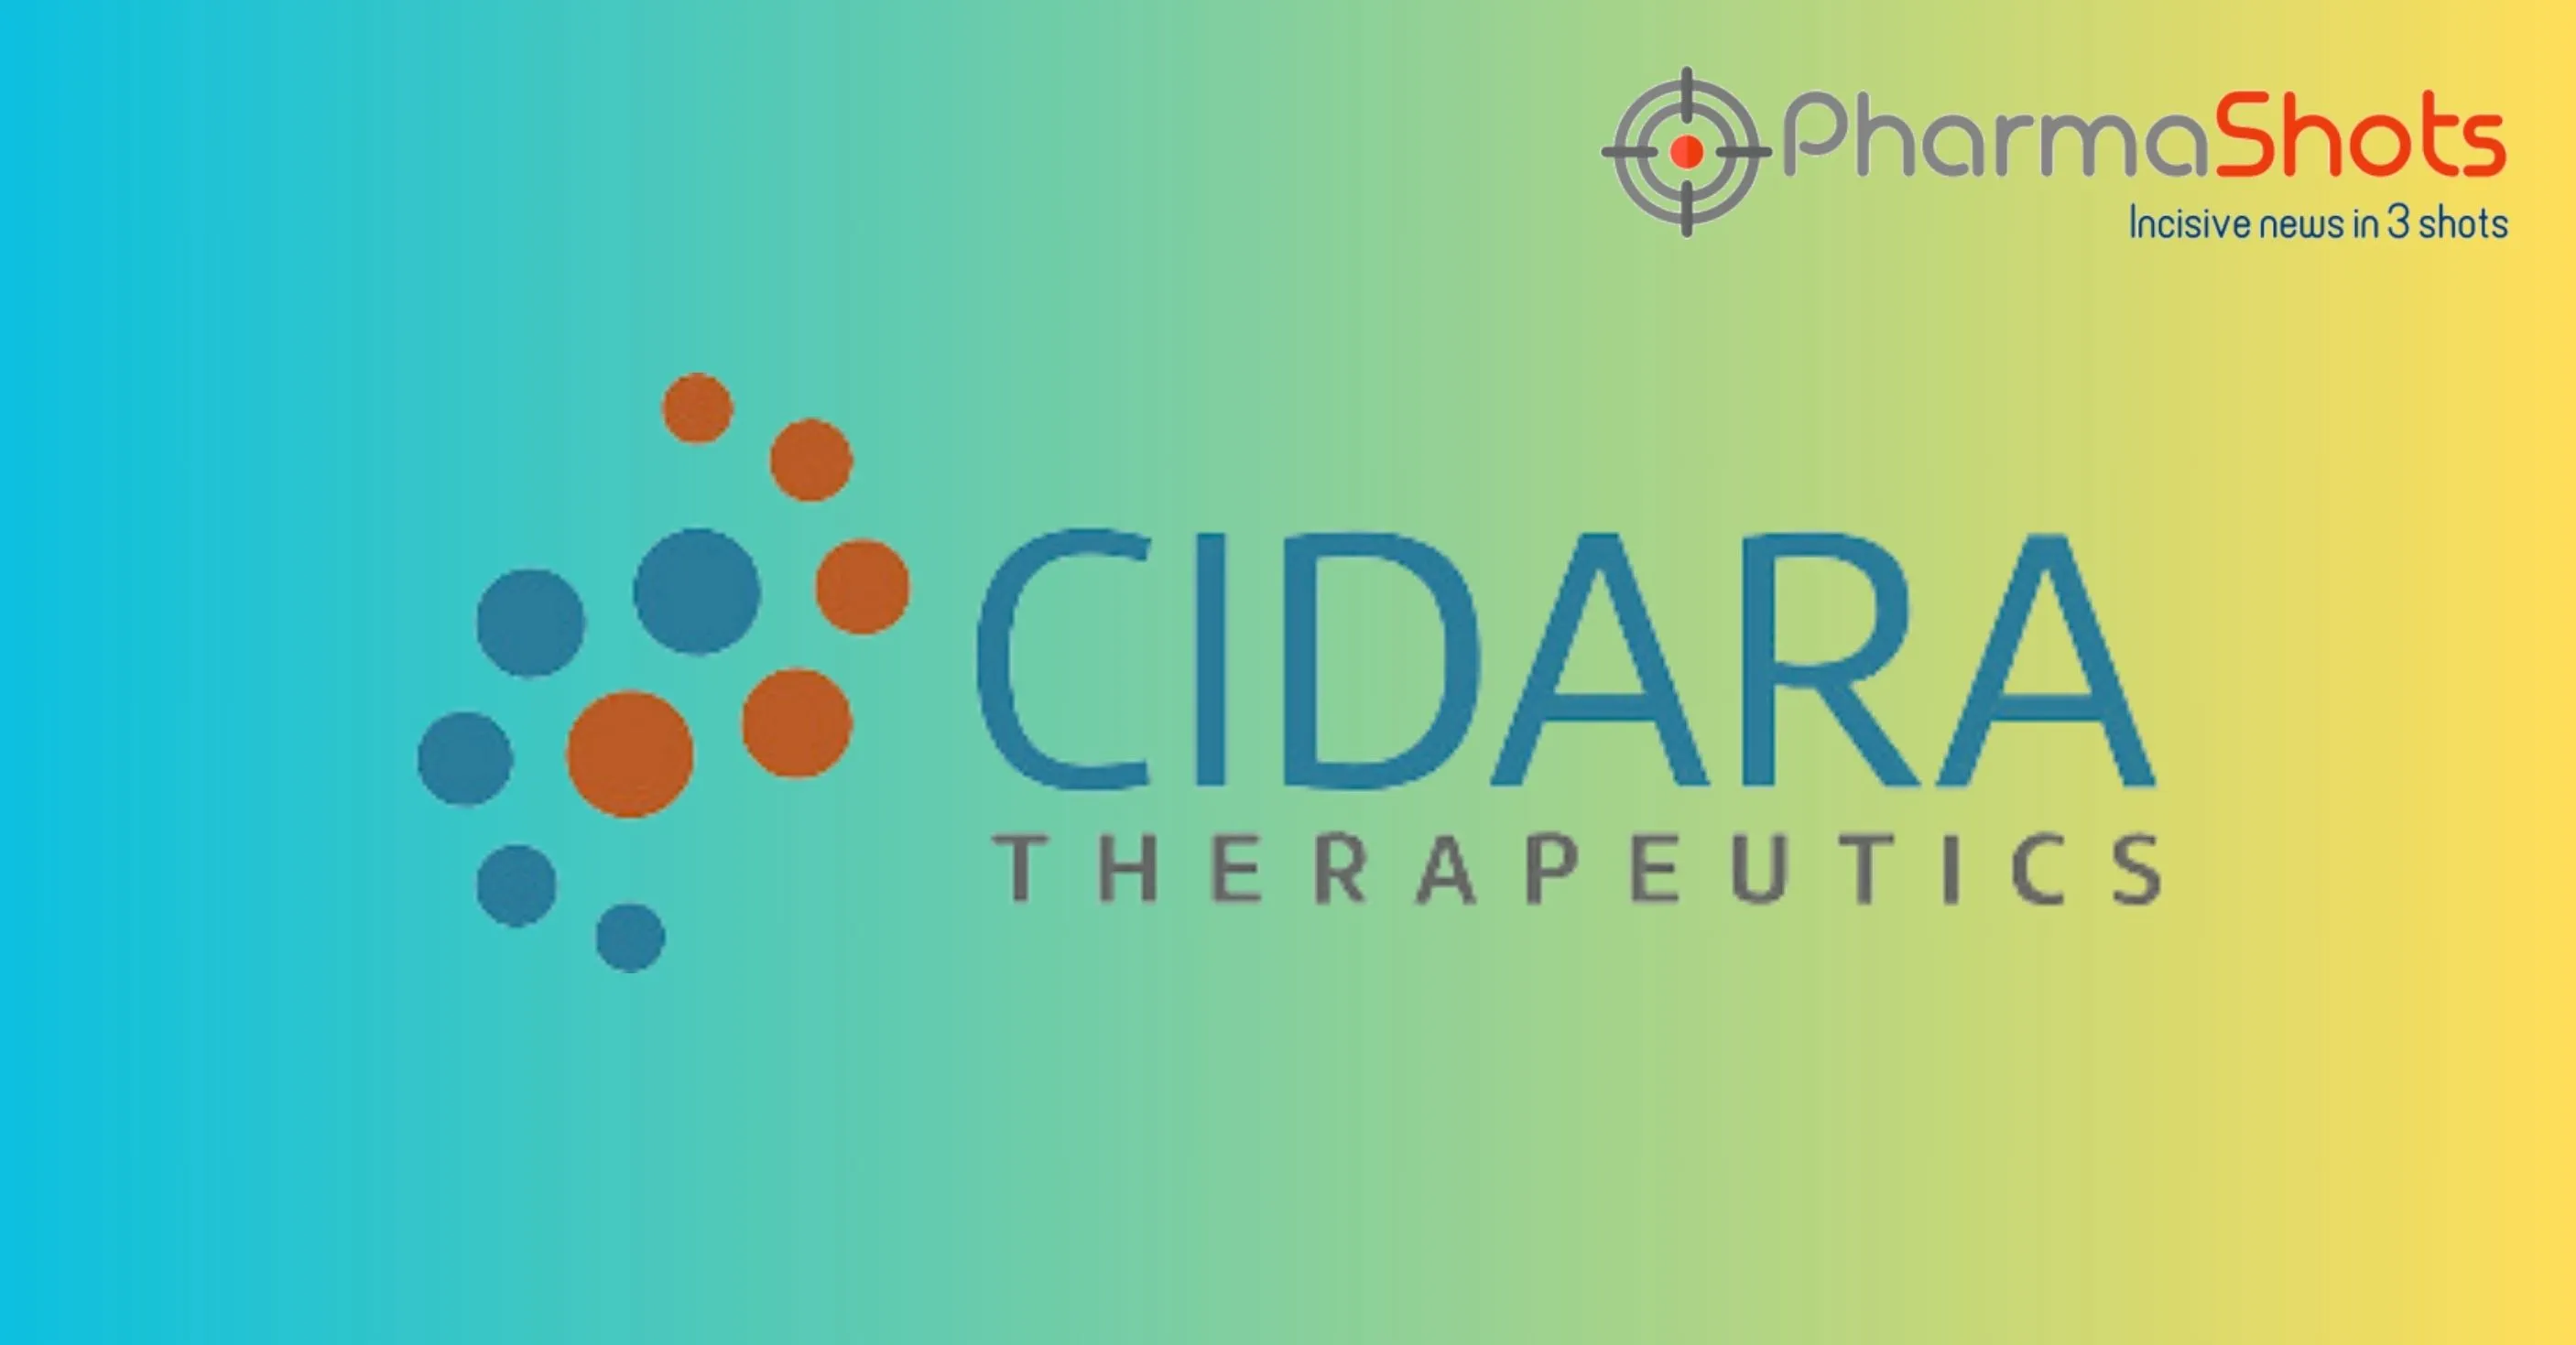 Cidara Therapeutics & Mundipharma received a Positive opinion from the EU’s CHMP for Rezzayo (Rezafungin) to Treat Invasive Candidiasis